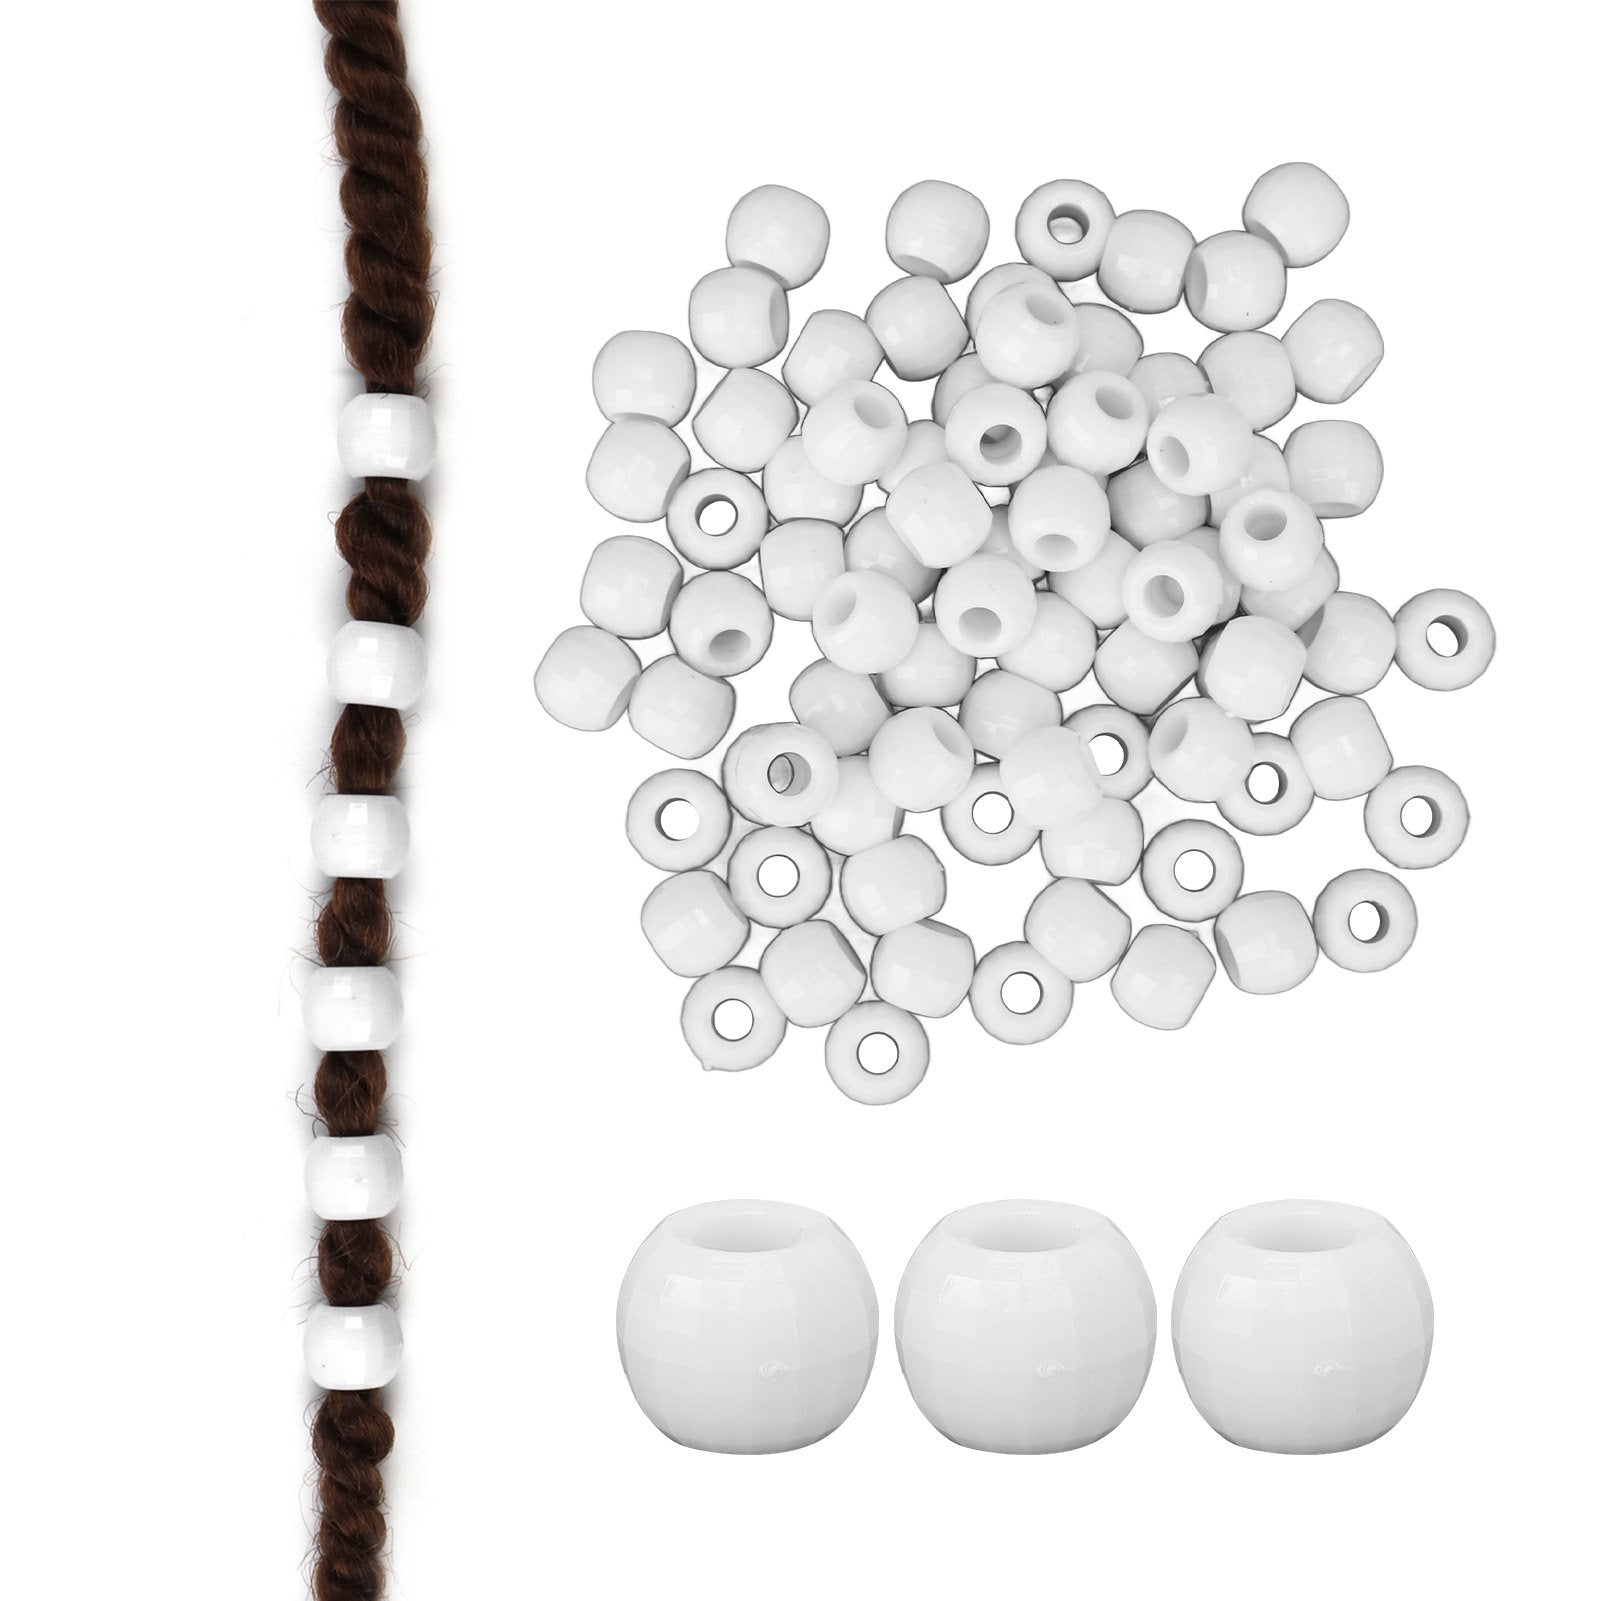 Plastic Balls, Hairstyle Accessories For Braids